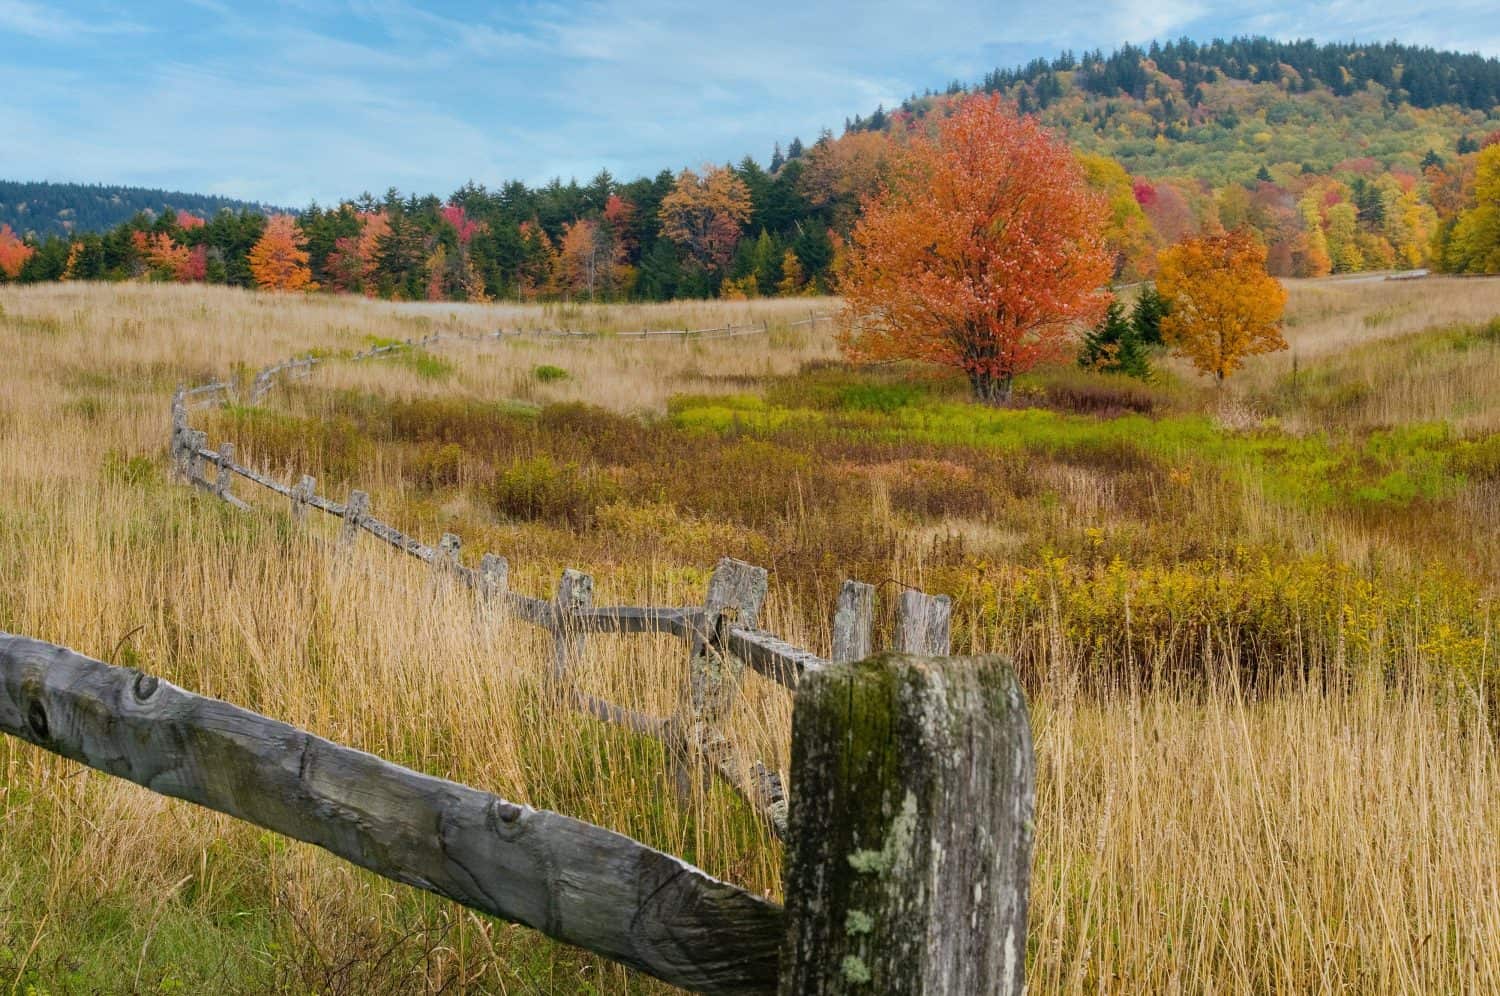 A West Virginia fall landscape along the highland scenic highway in Monongahela National Forest. A weathered wooden fence runs through the frame leading the eye to the mountains in the background.